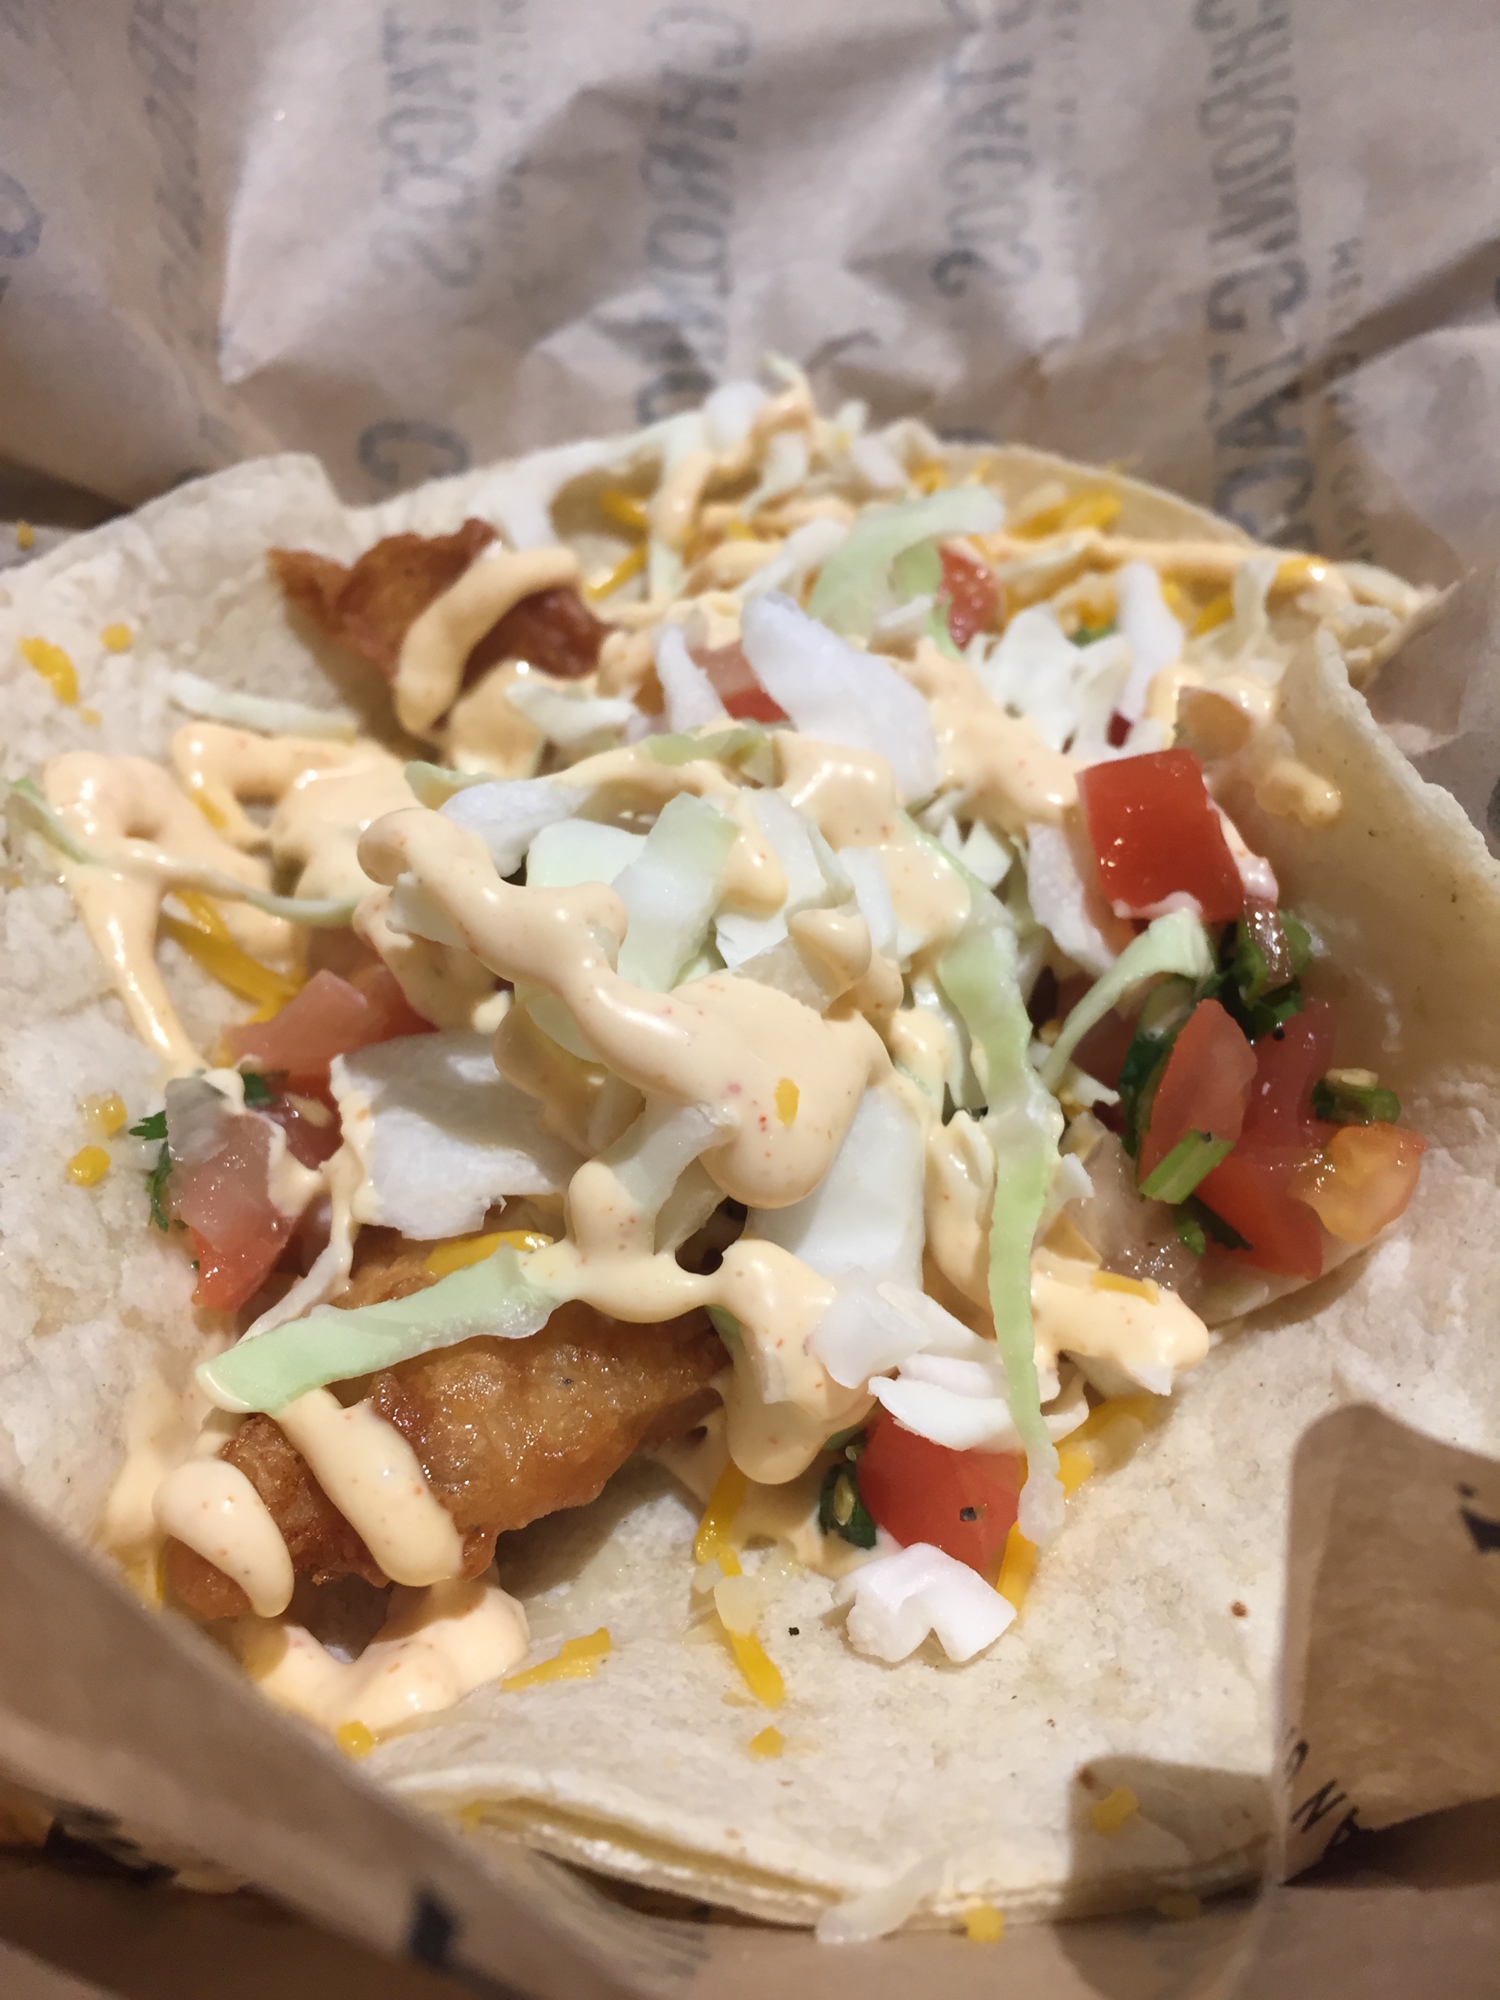 The beer-battered, baja-style fish taco is made fresh to order, dipped in Tecate beer batter and deep fried. Served on a corn tortilla with baja sauce, cabbage and pico de gallo.